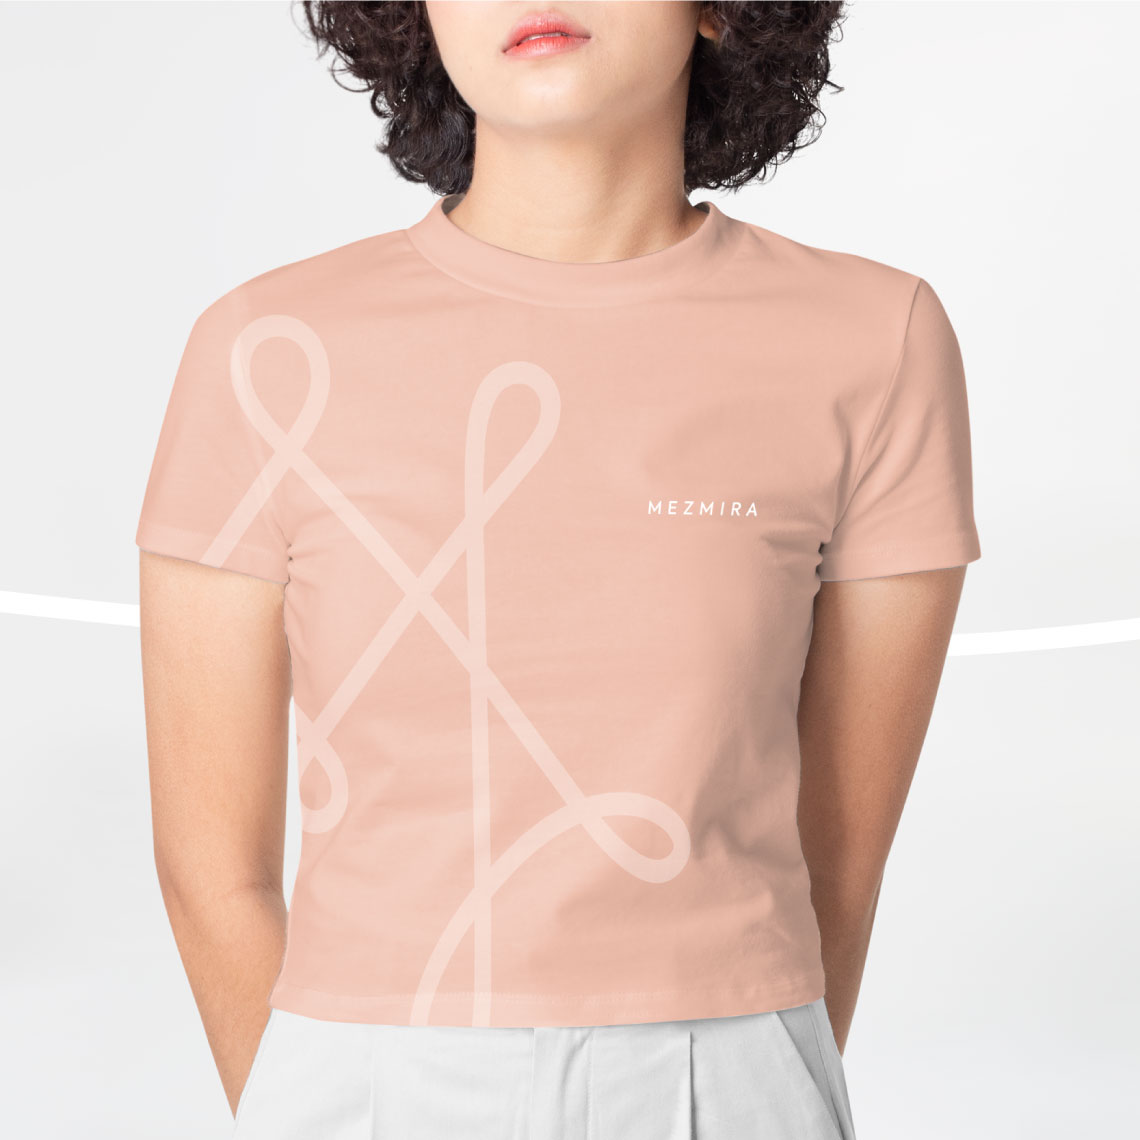 Mezmira logo and graphic motif applied on a stylish peach t-shirt